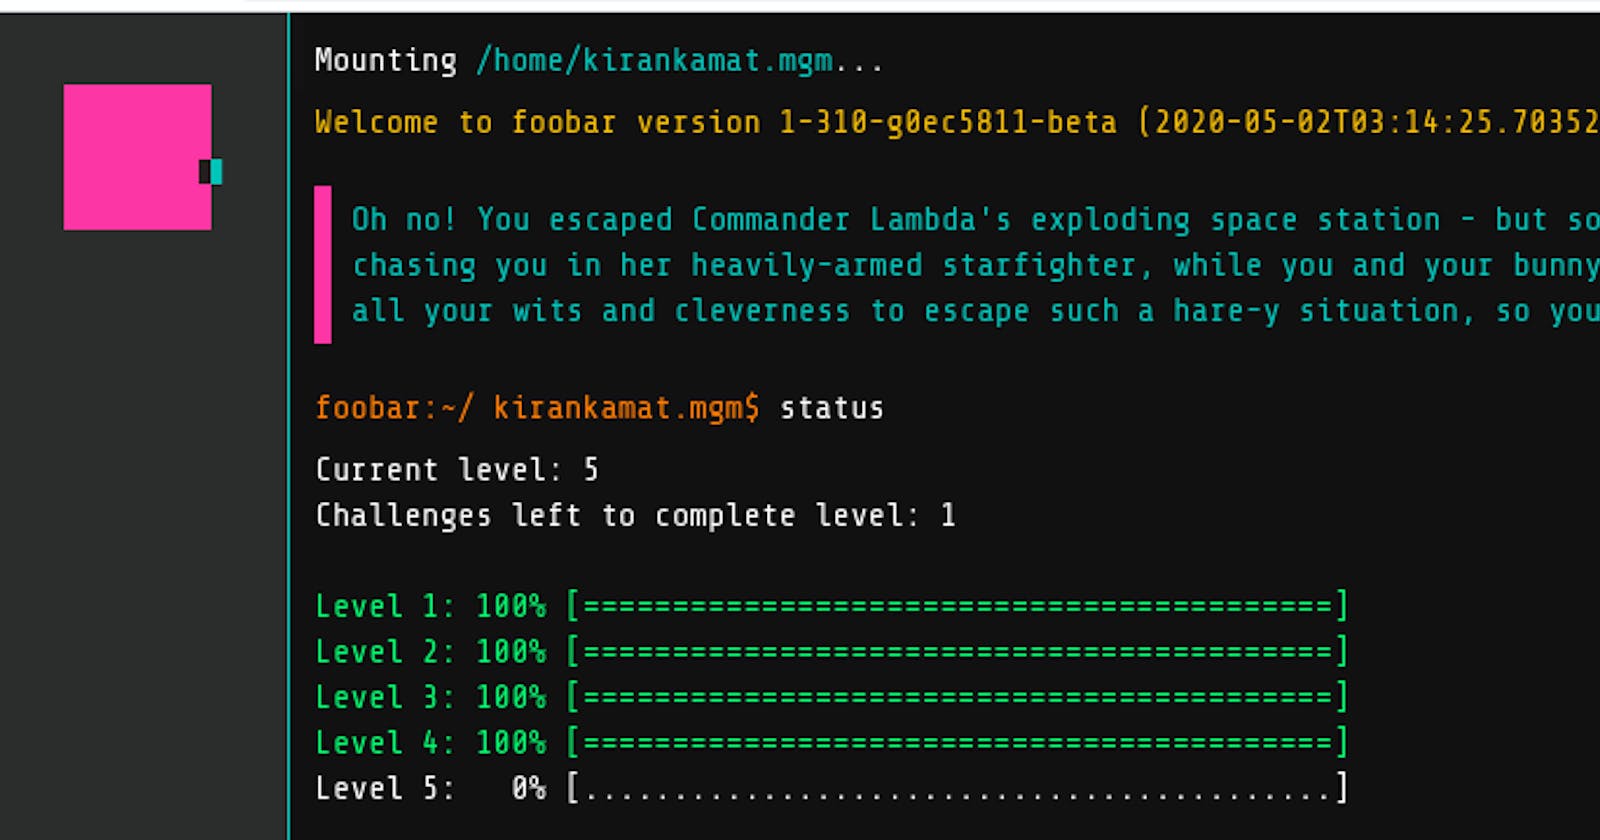 My experience of Google foobar challenge